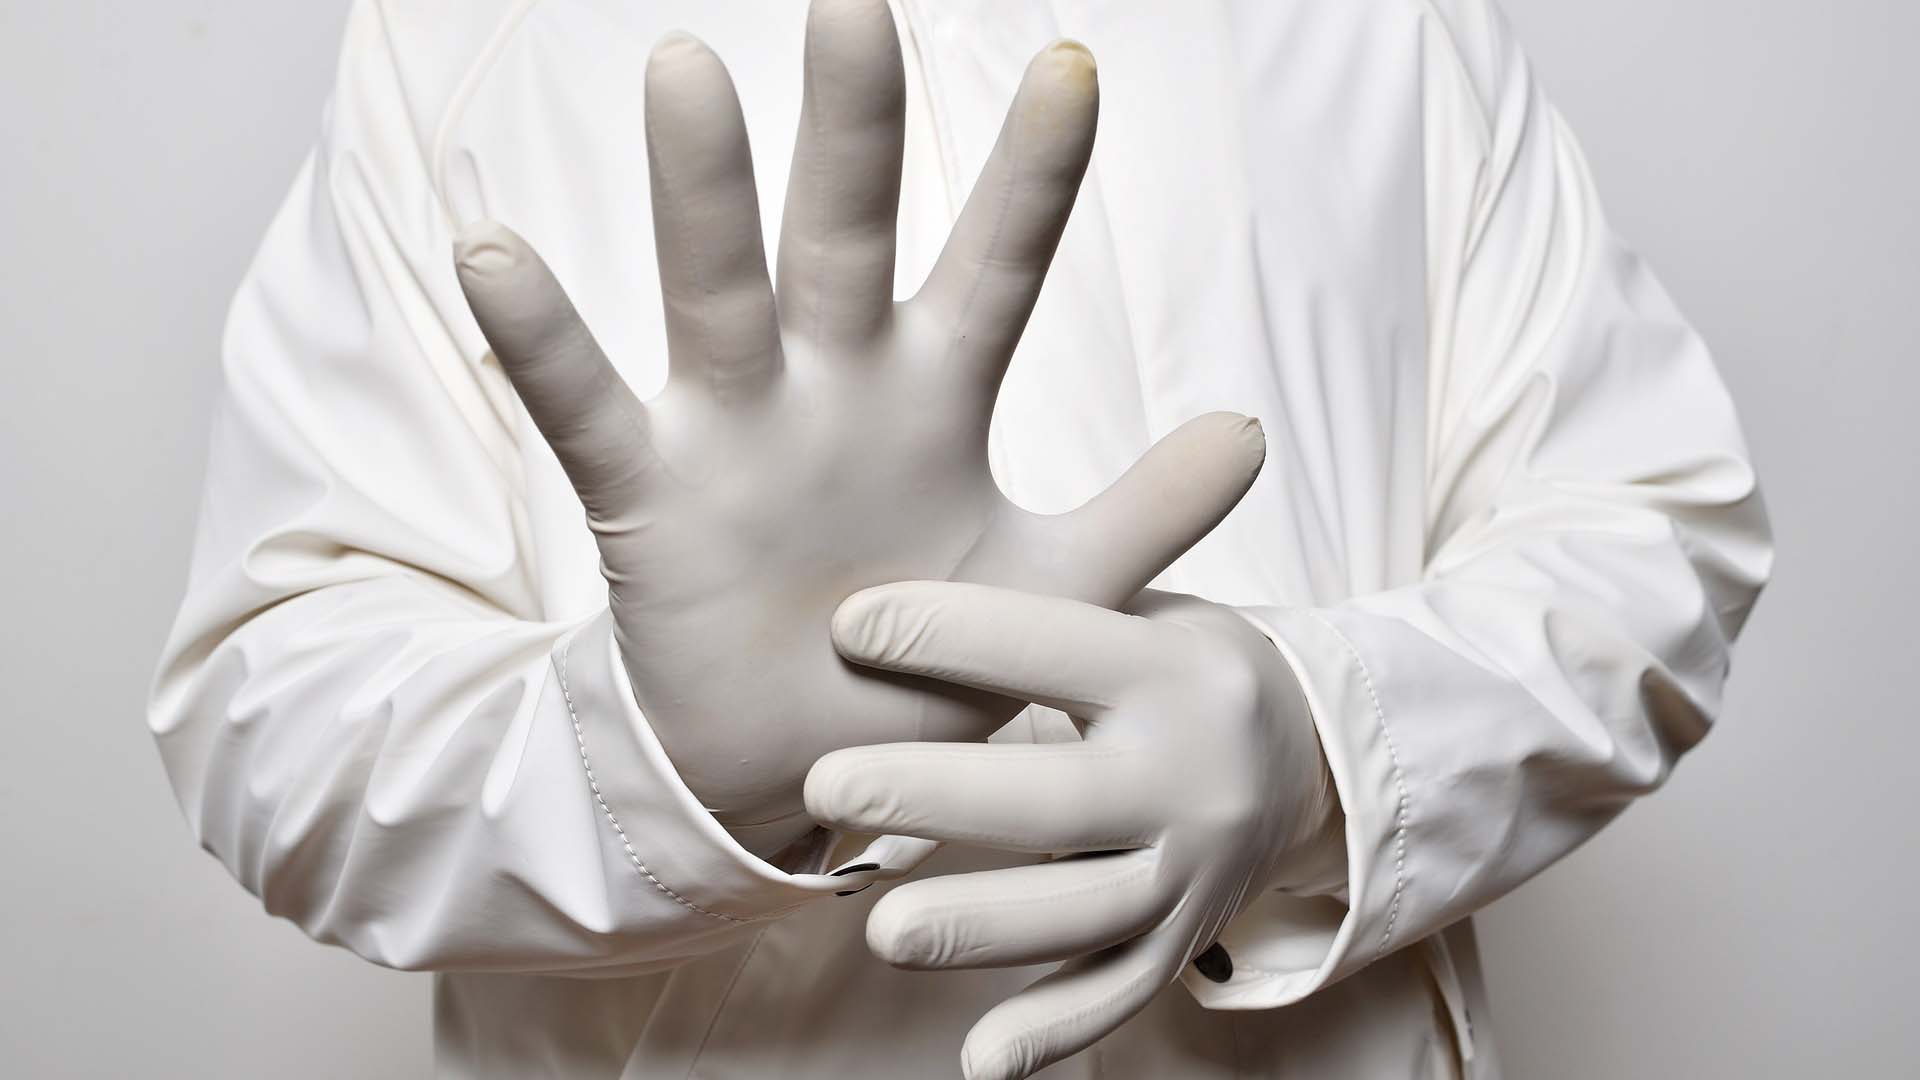 What Are Lab Gloves? Types, Uses, and Significance